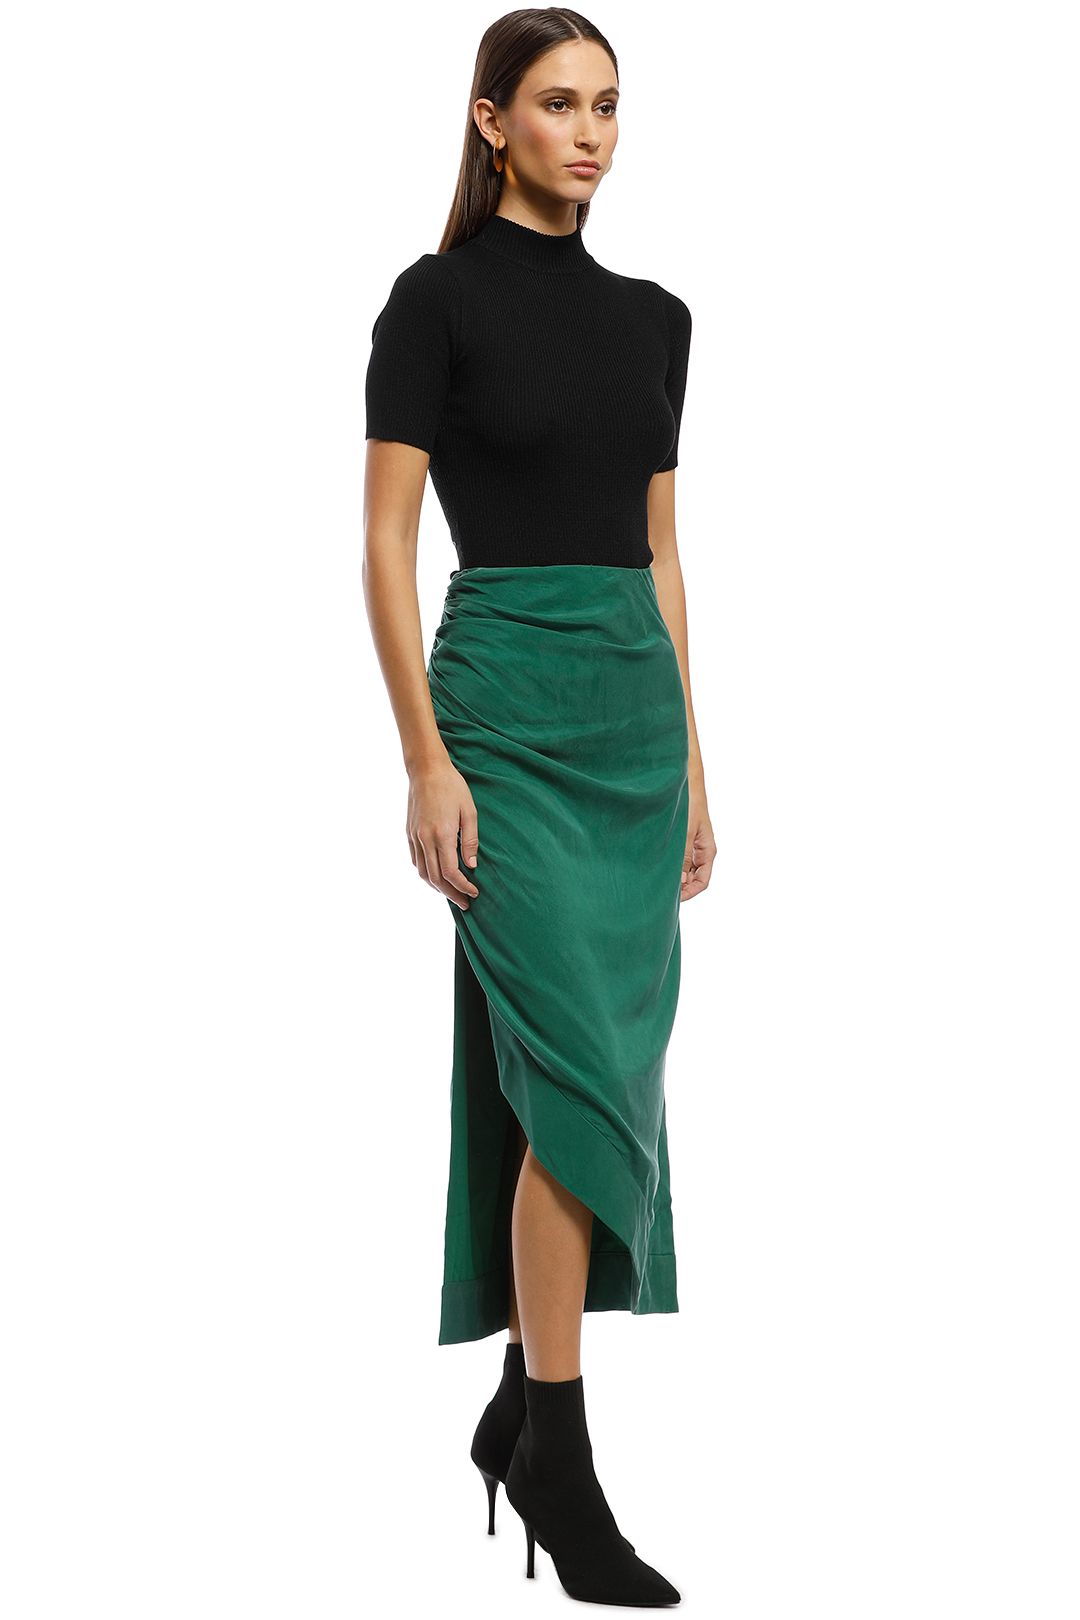 CMEO Collective - Ended Up Here Skirt - Green - Side